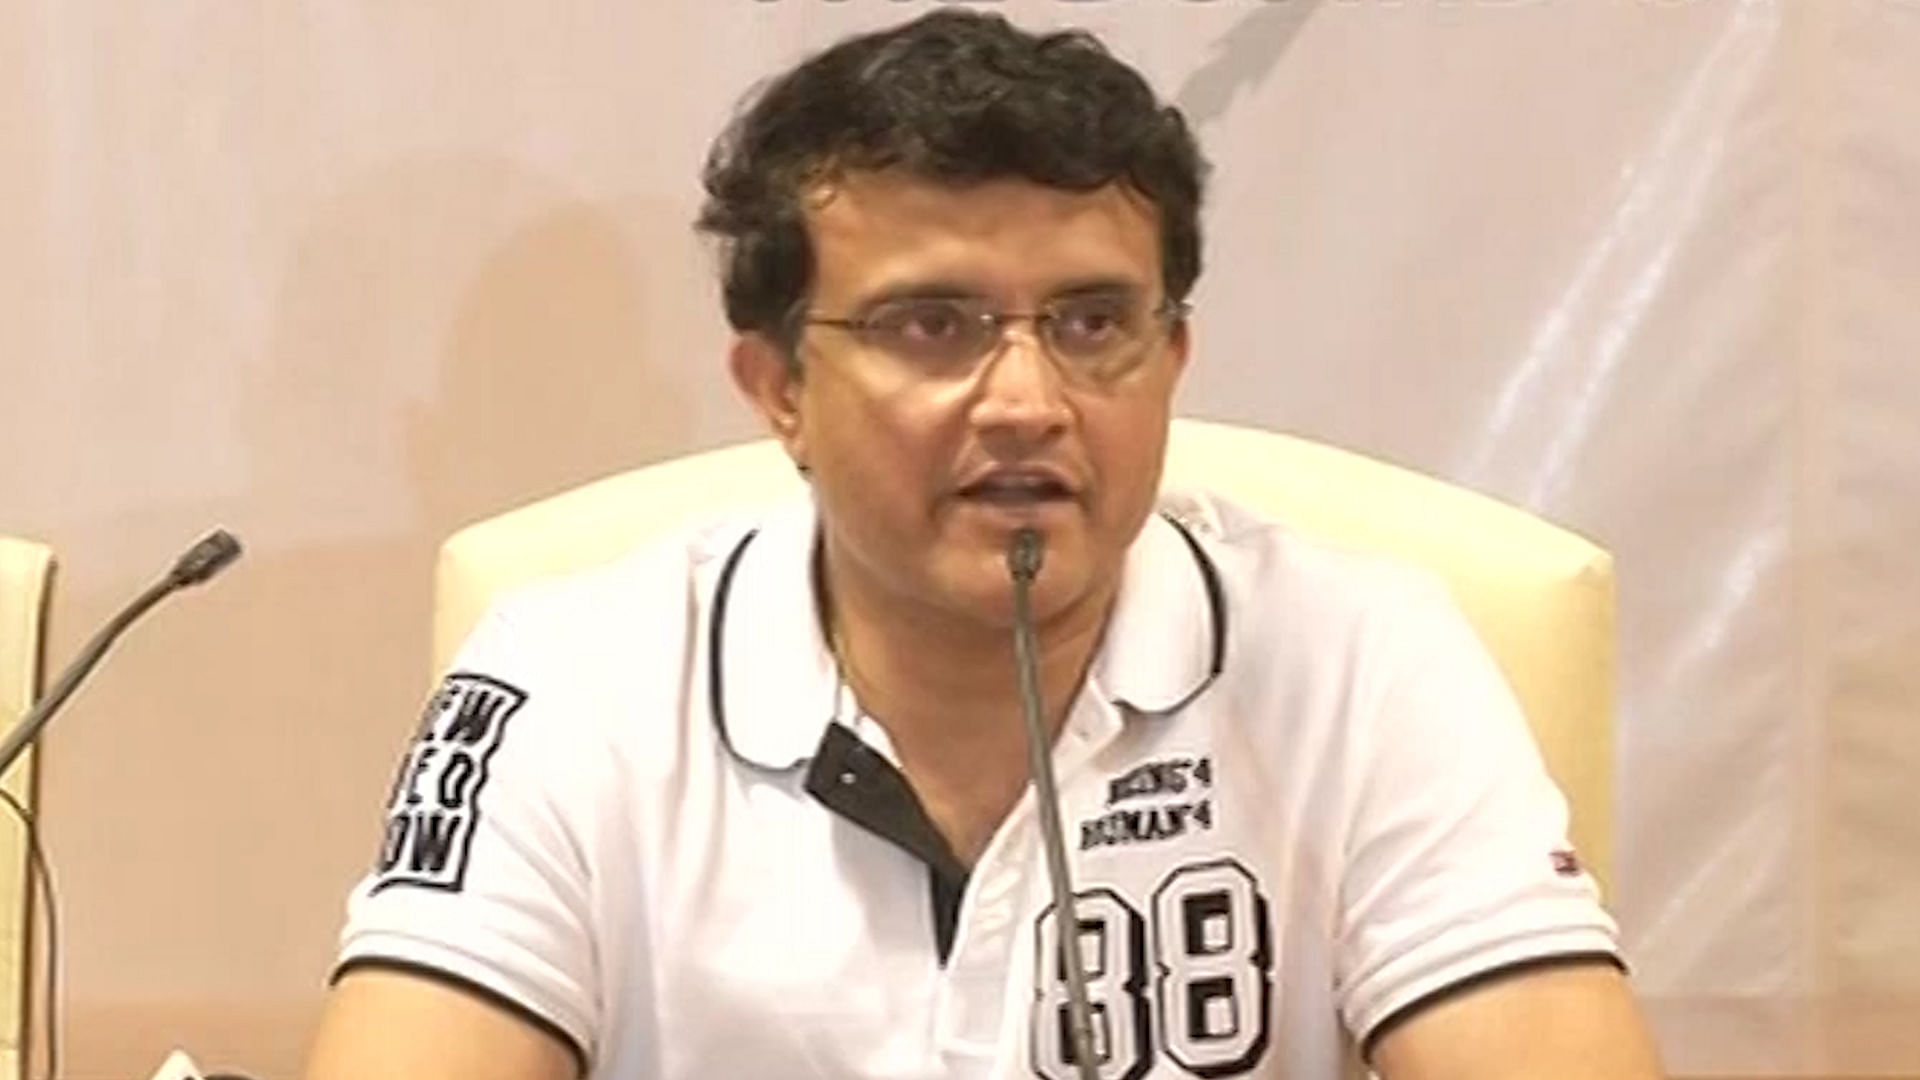 Sourav Ganguly has strongly criticised Pakistan Prime Minister Imran Khan for his recent speech at the 74th session of the UN General Assembly.